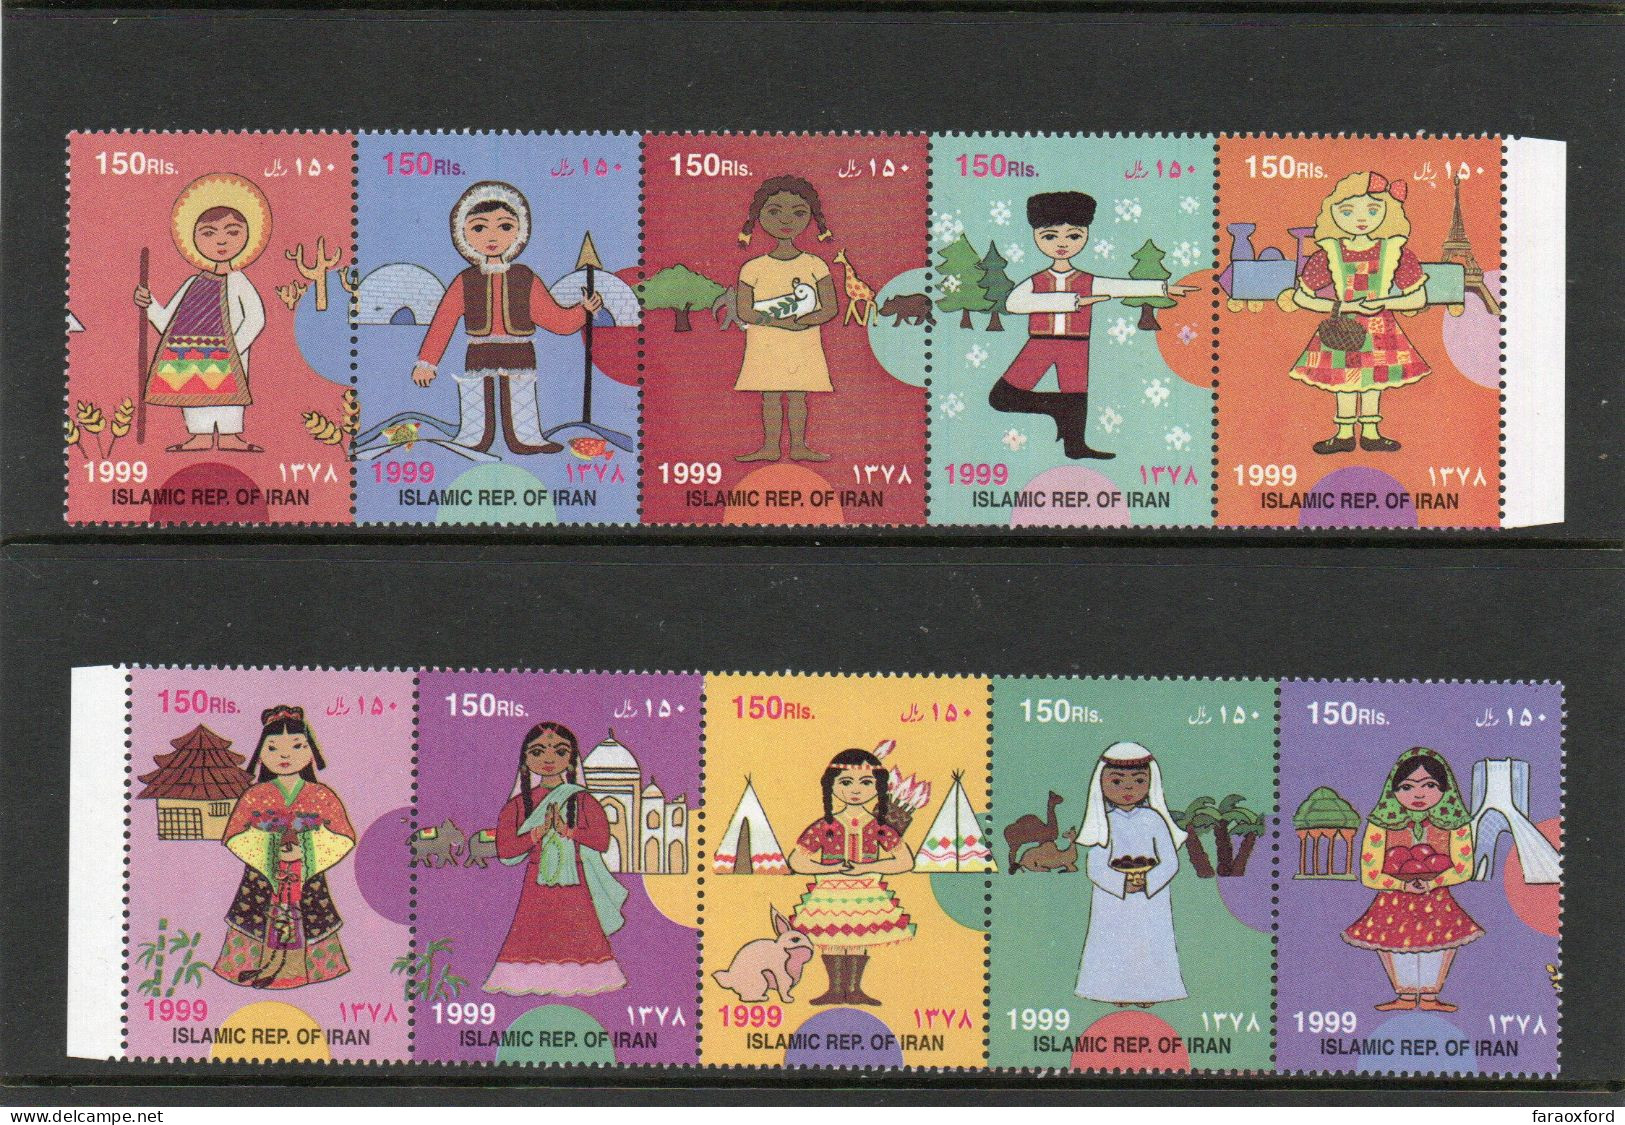 IRAN - ايران - PERSIA - 1999 - CHILDREN'S DAY - COMPLETE SET OF STAMPS - MINT NOT HINGED - Irán